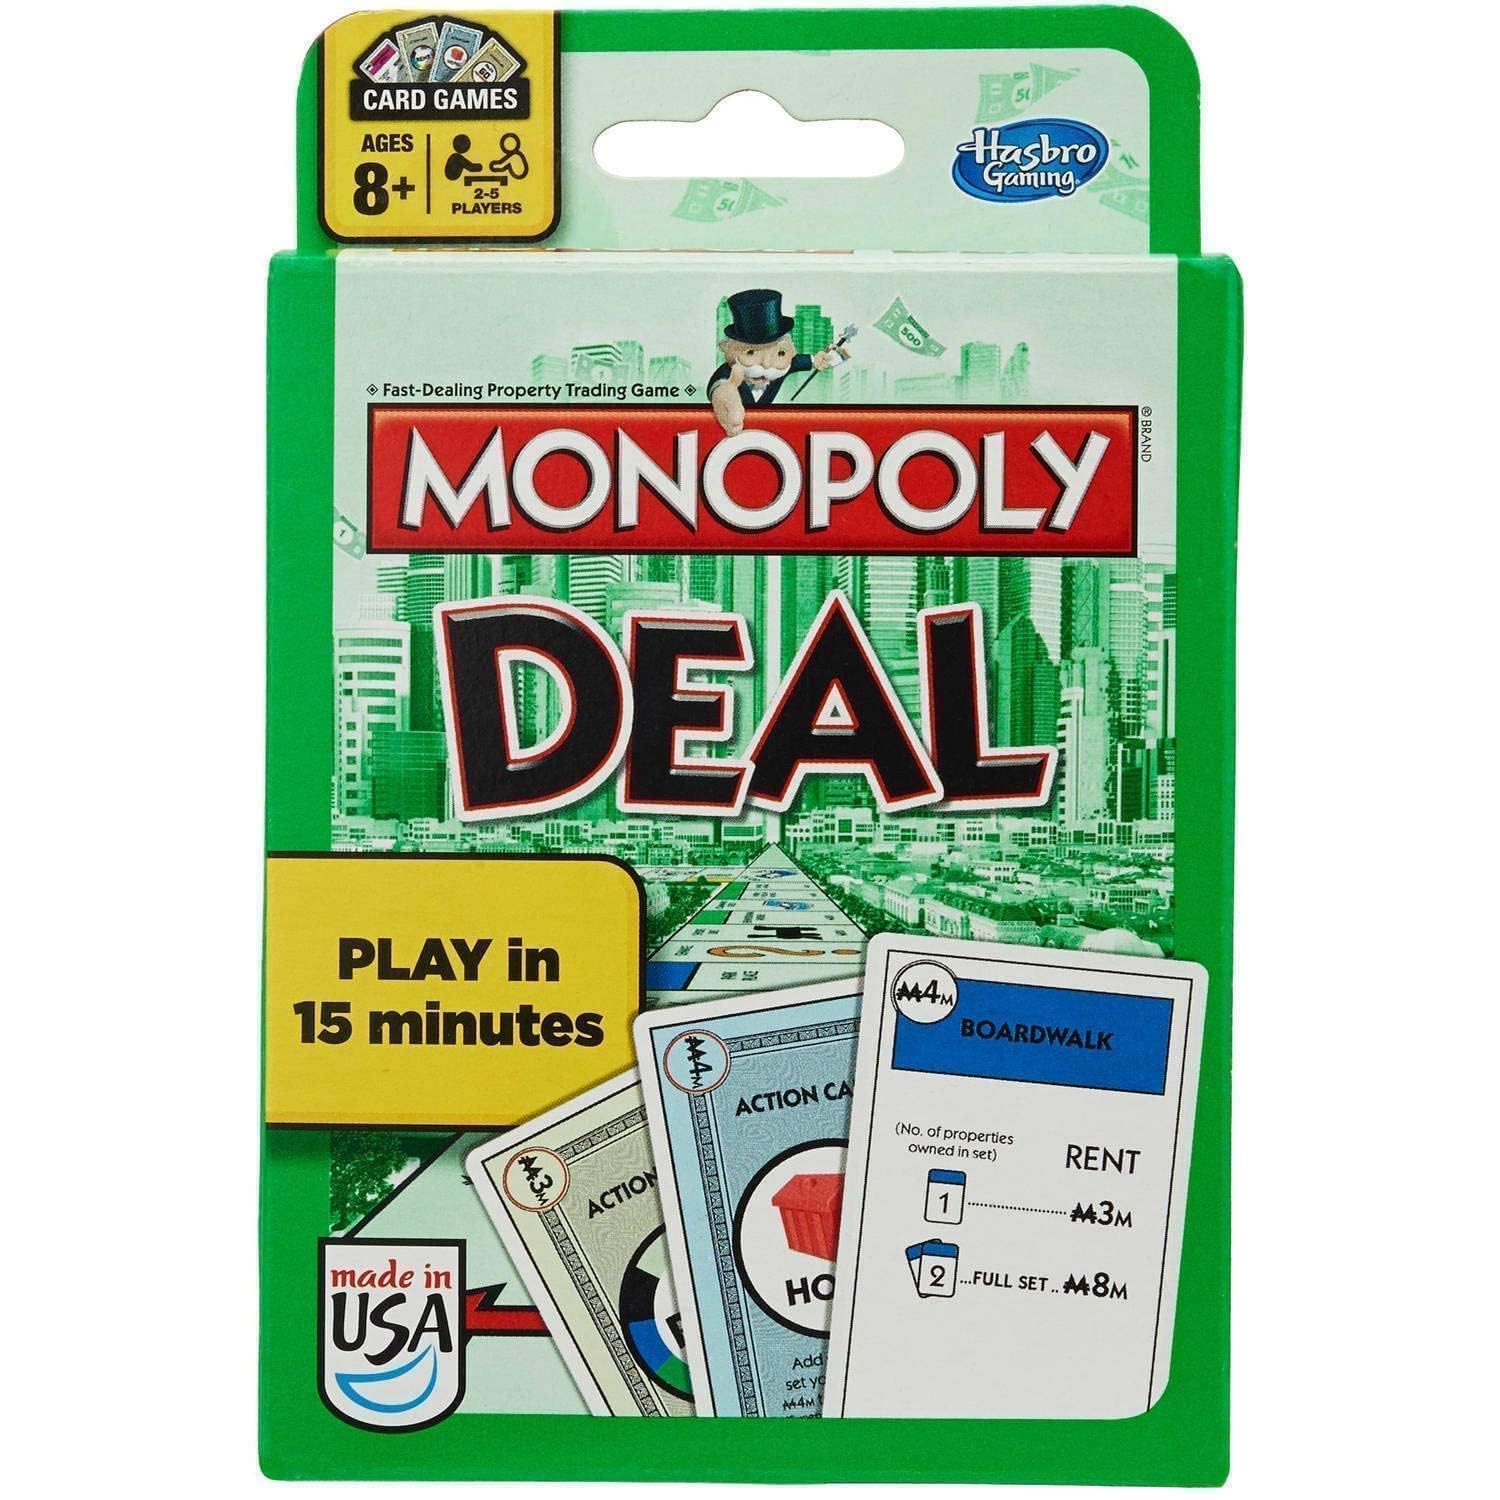 MONOPOLY Deal Card Game, Quick-Playing Card Game for 2-5 Players, Game for Families and Kids Ages 8 and Up (Amazon Exclusive)